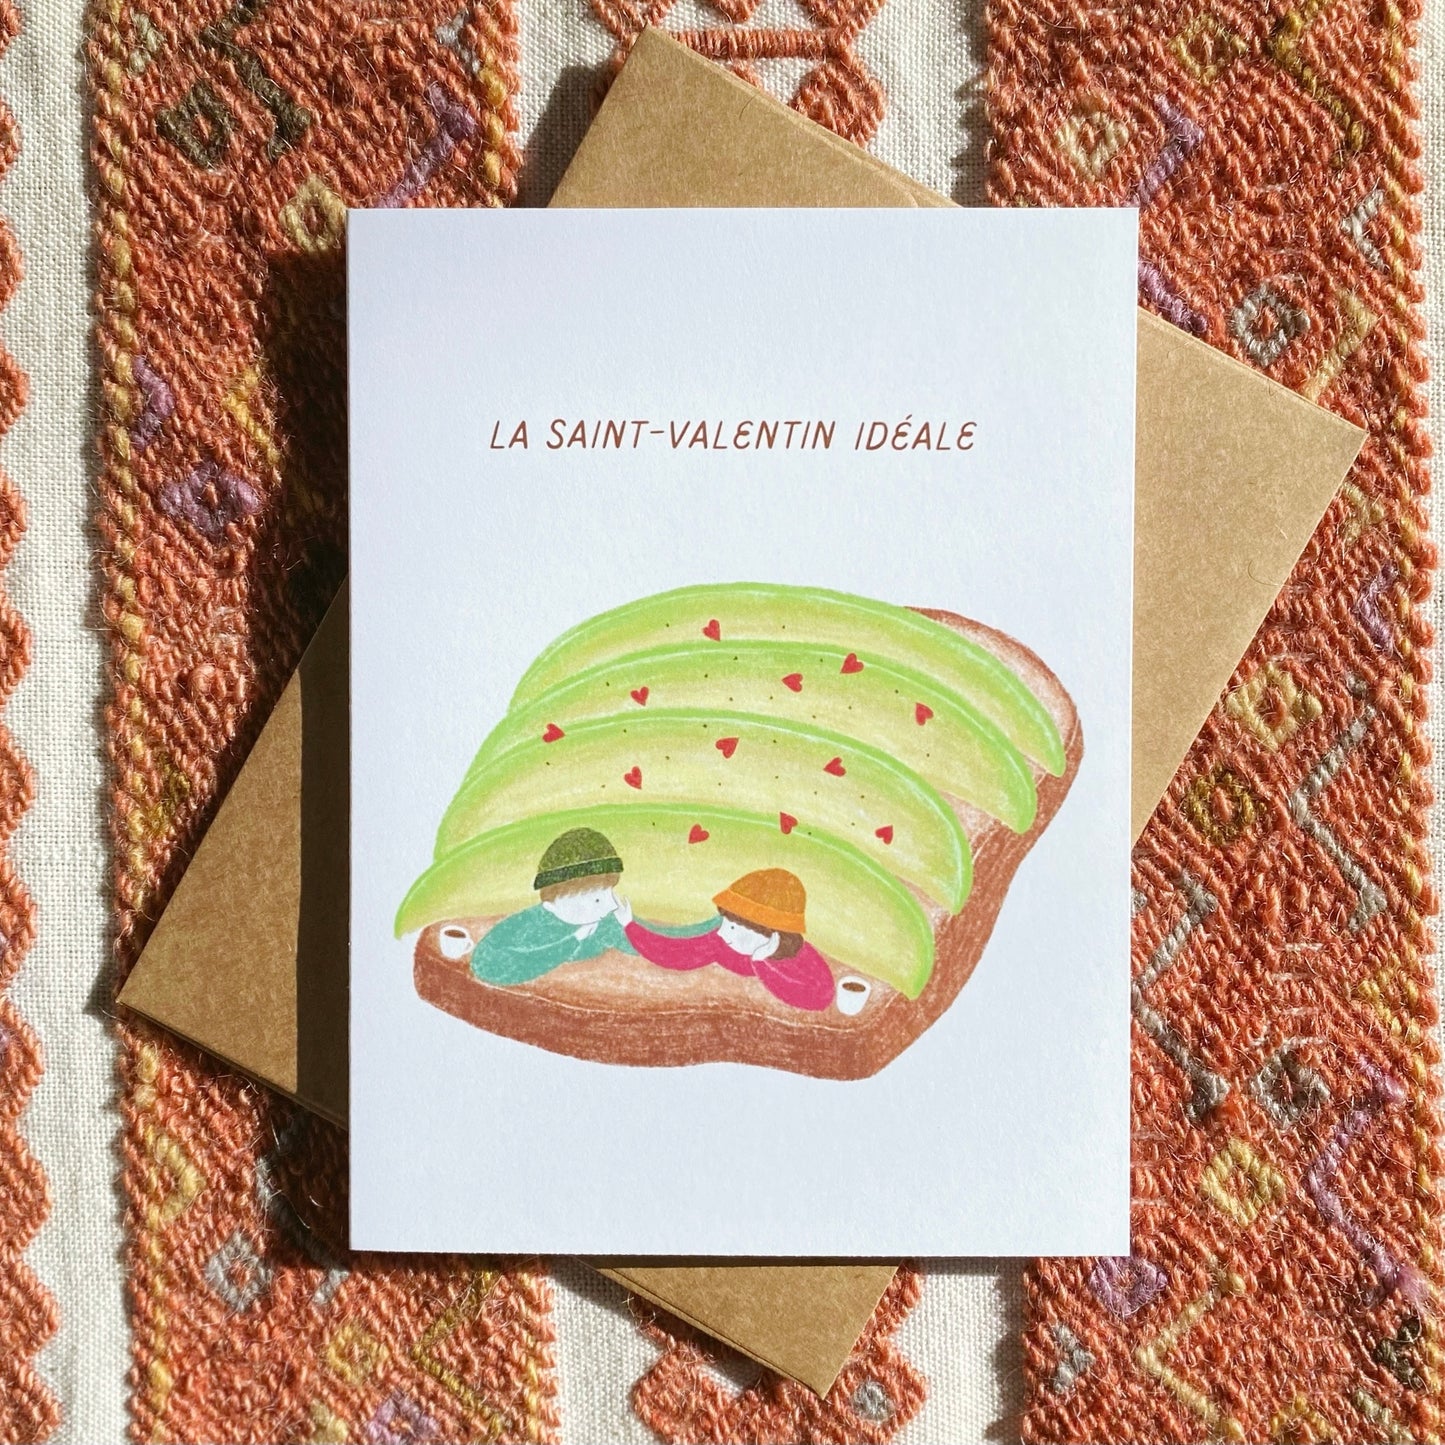 Cute French Valentine's Day Card with an Avocado Toast and Coffee Lovers